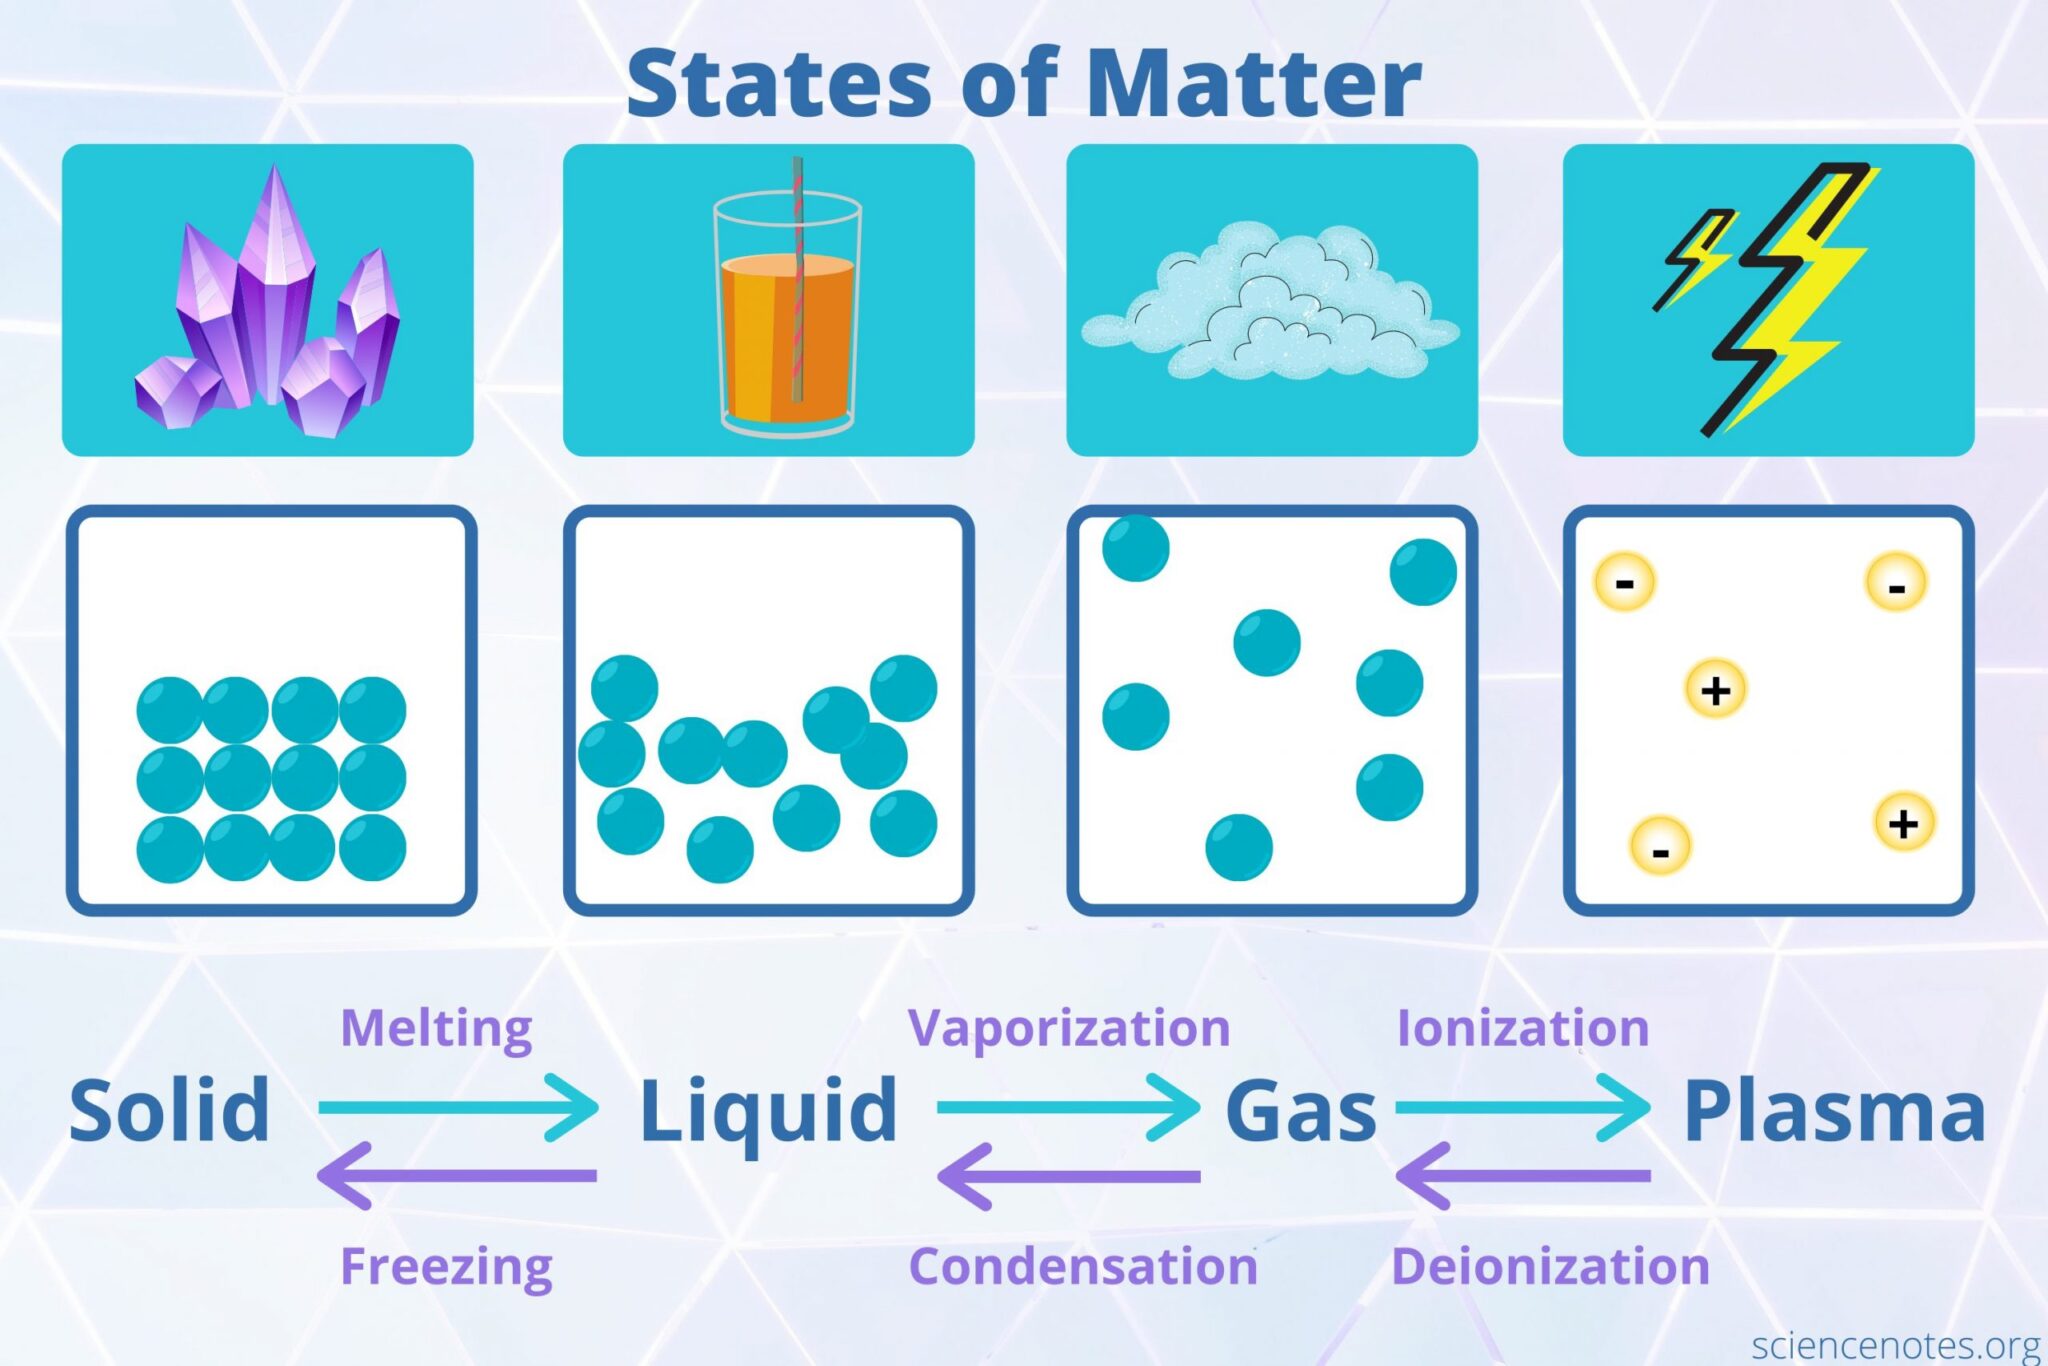 powerpoint presentation on states of matter for grade 4